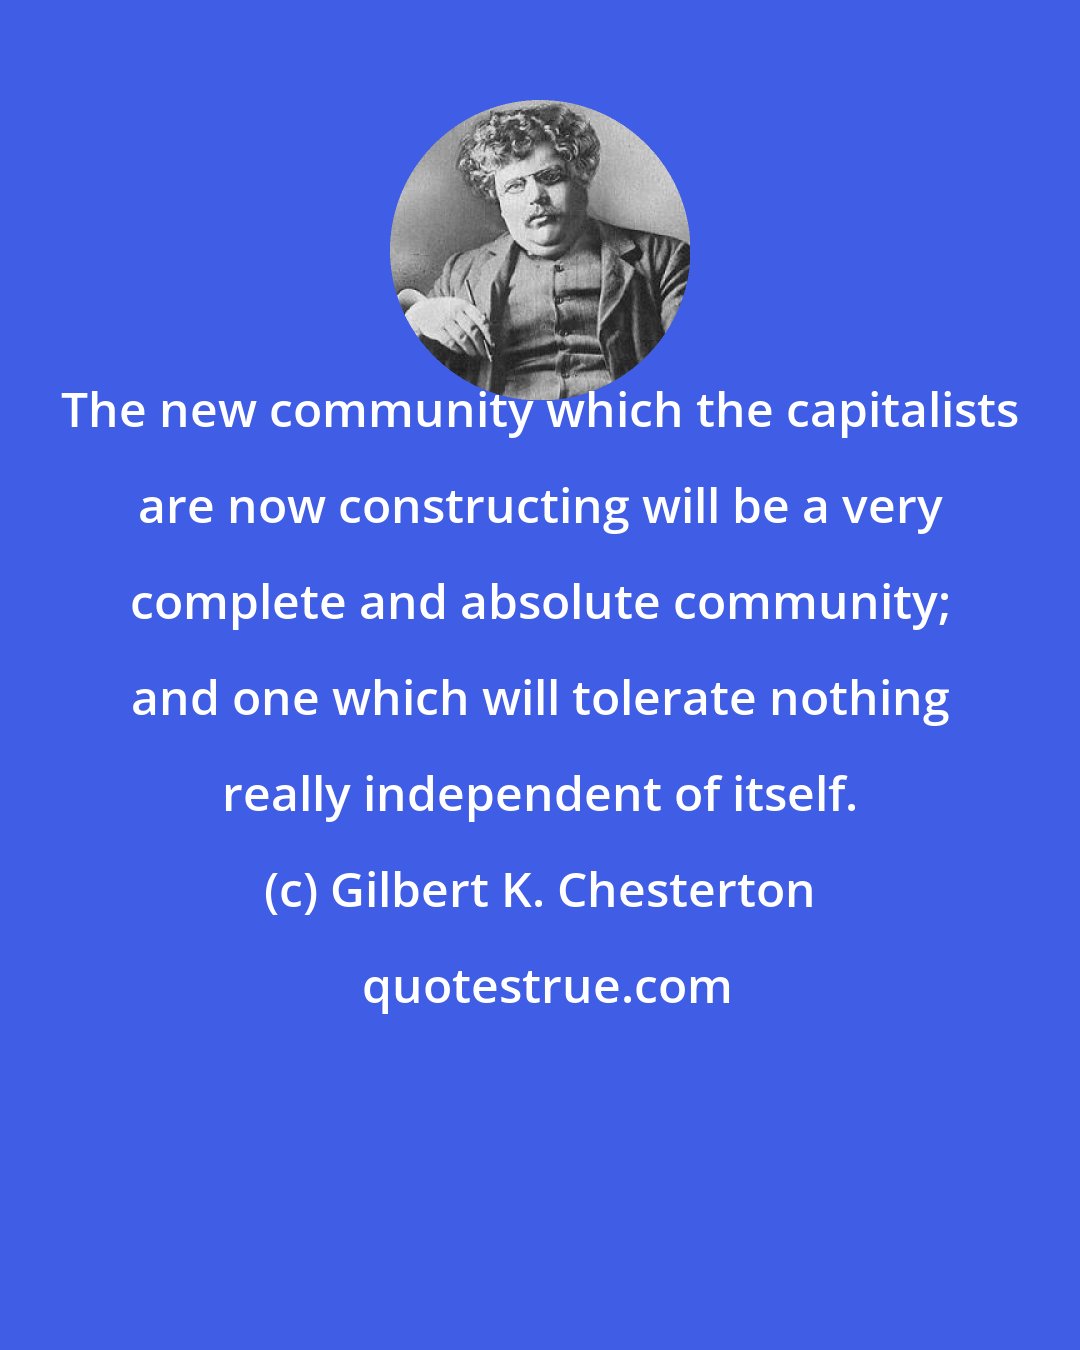 Gilbert K. Chesterton: The new community which the capitalists are now constructing will be a very complete and absolute community; and one which will tolerate nothing really independent of itself.